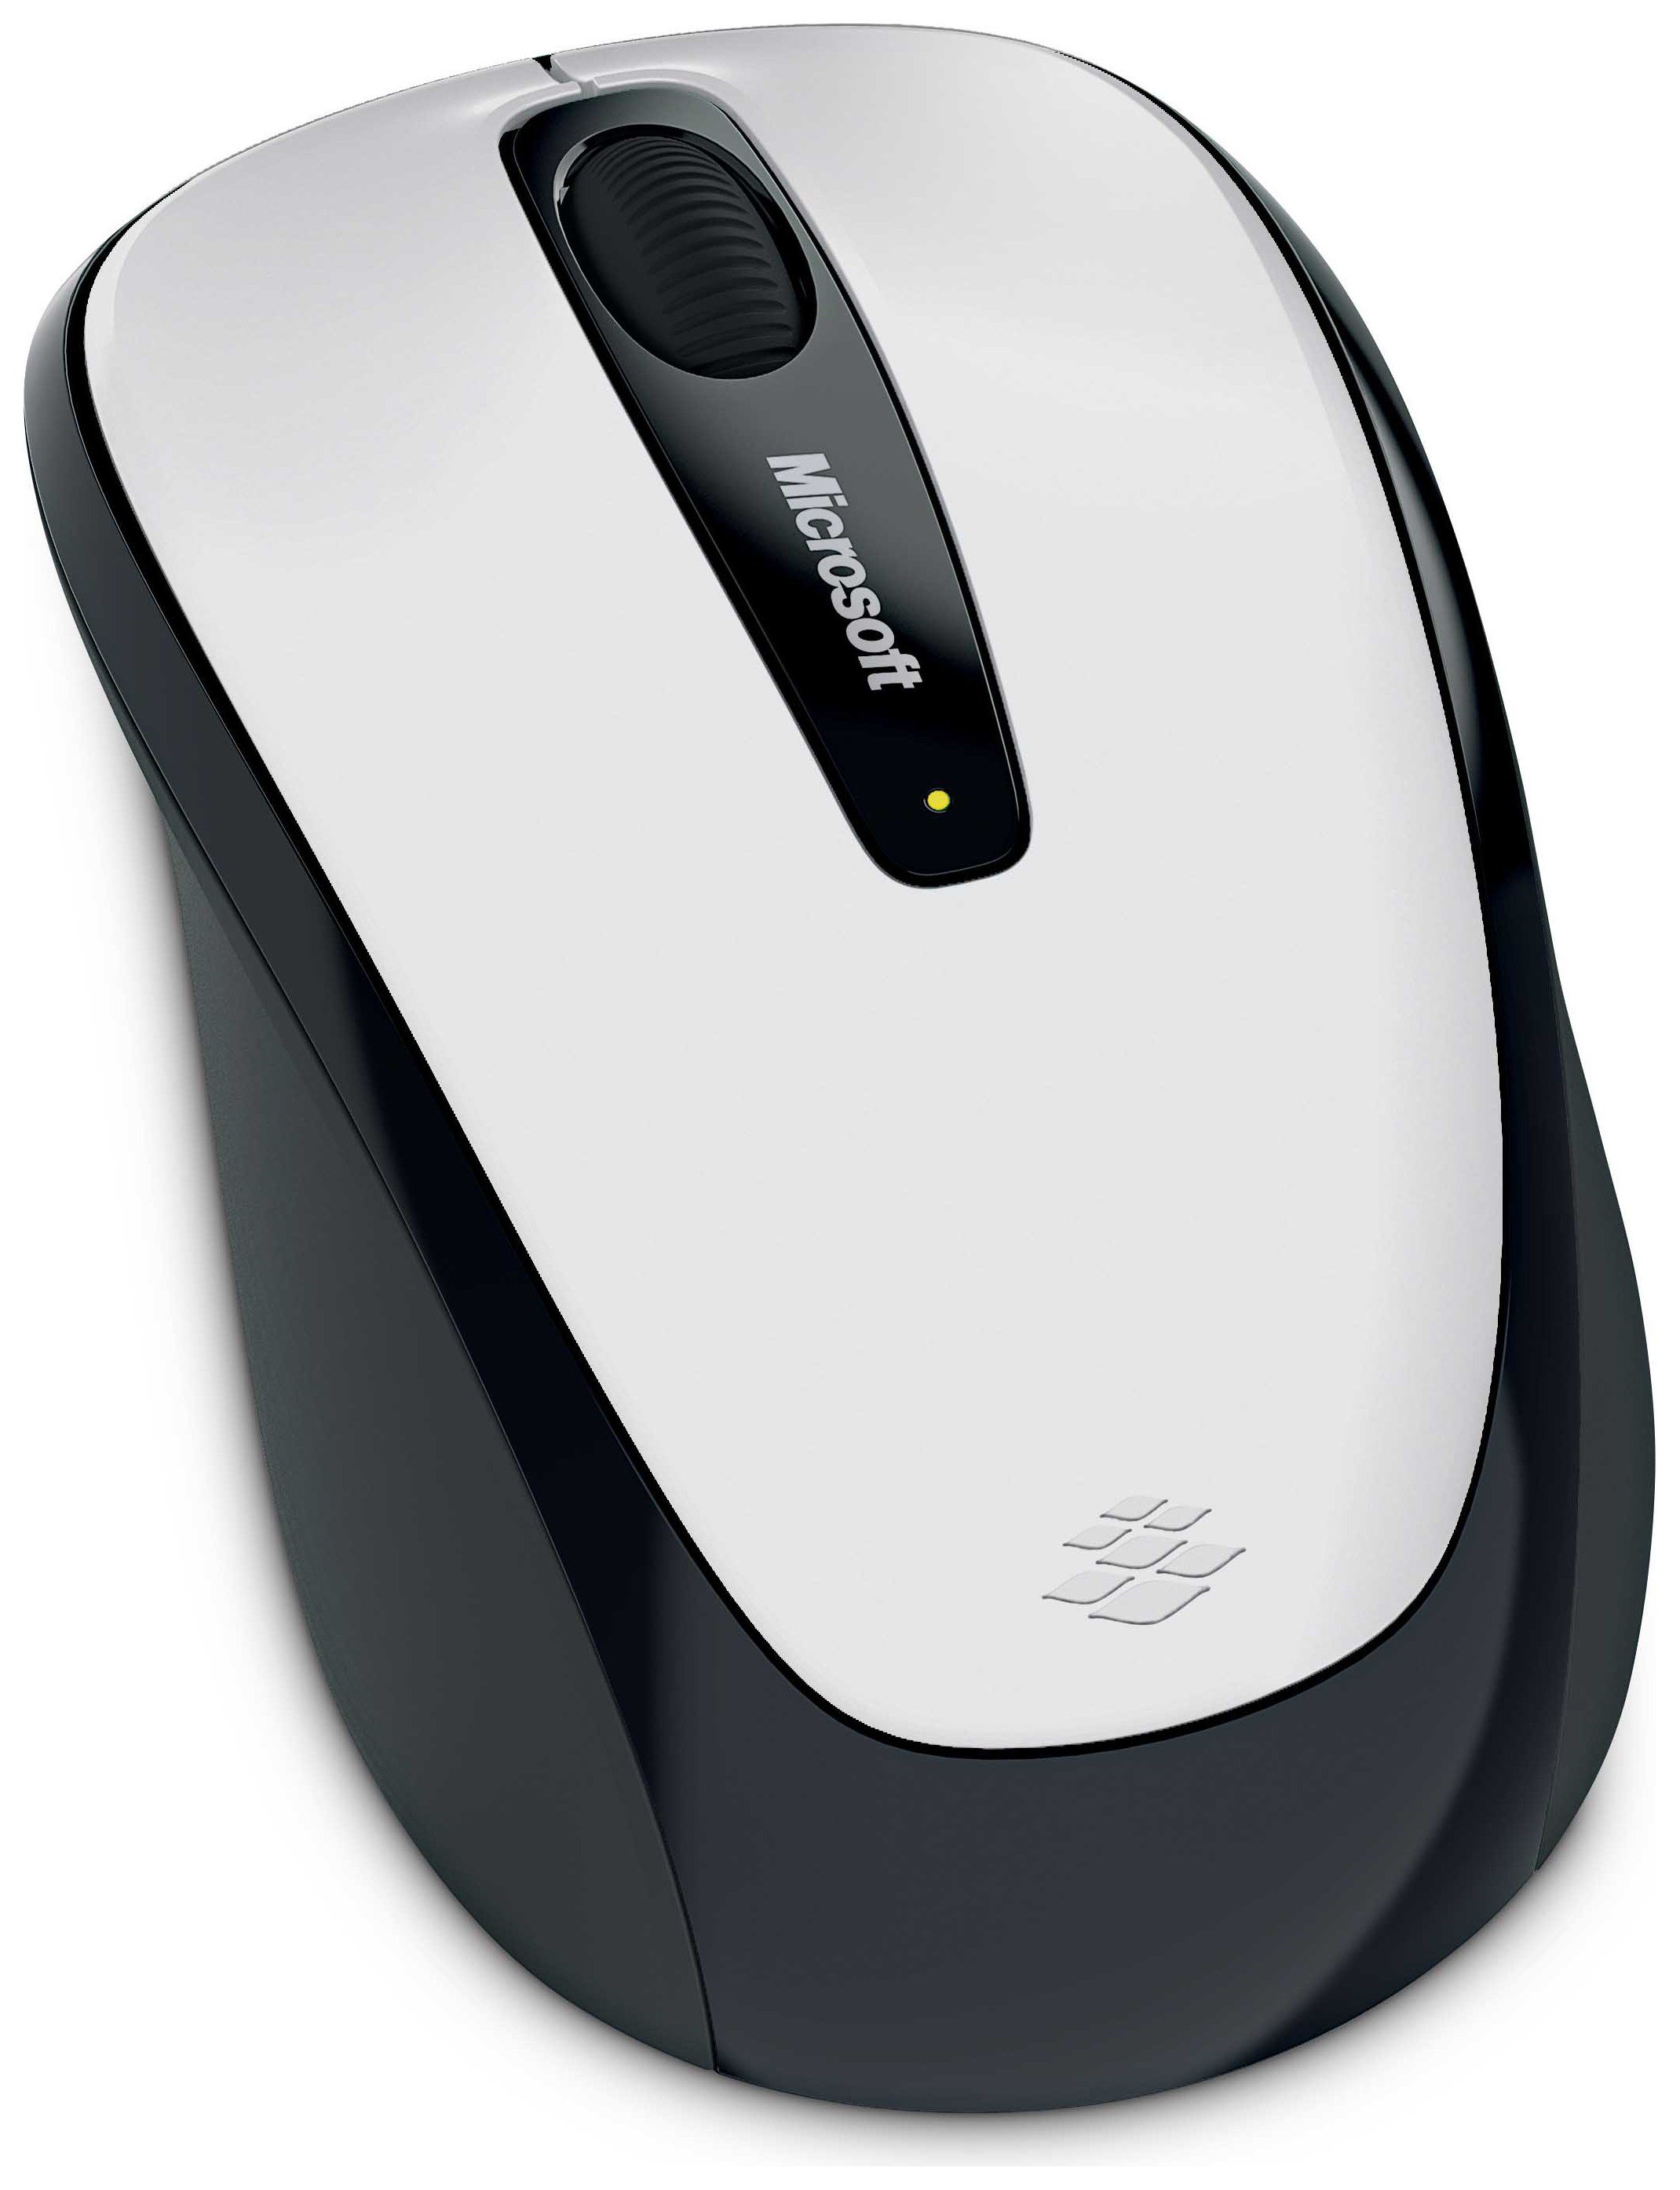 Microsoft - 3500 - Wireless Mouse - White Review - Review Electronics